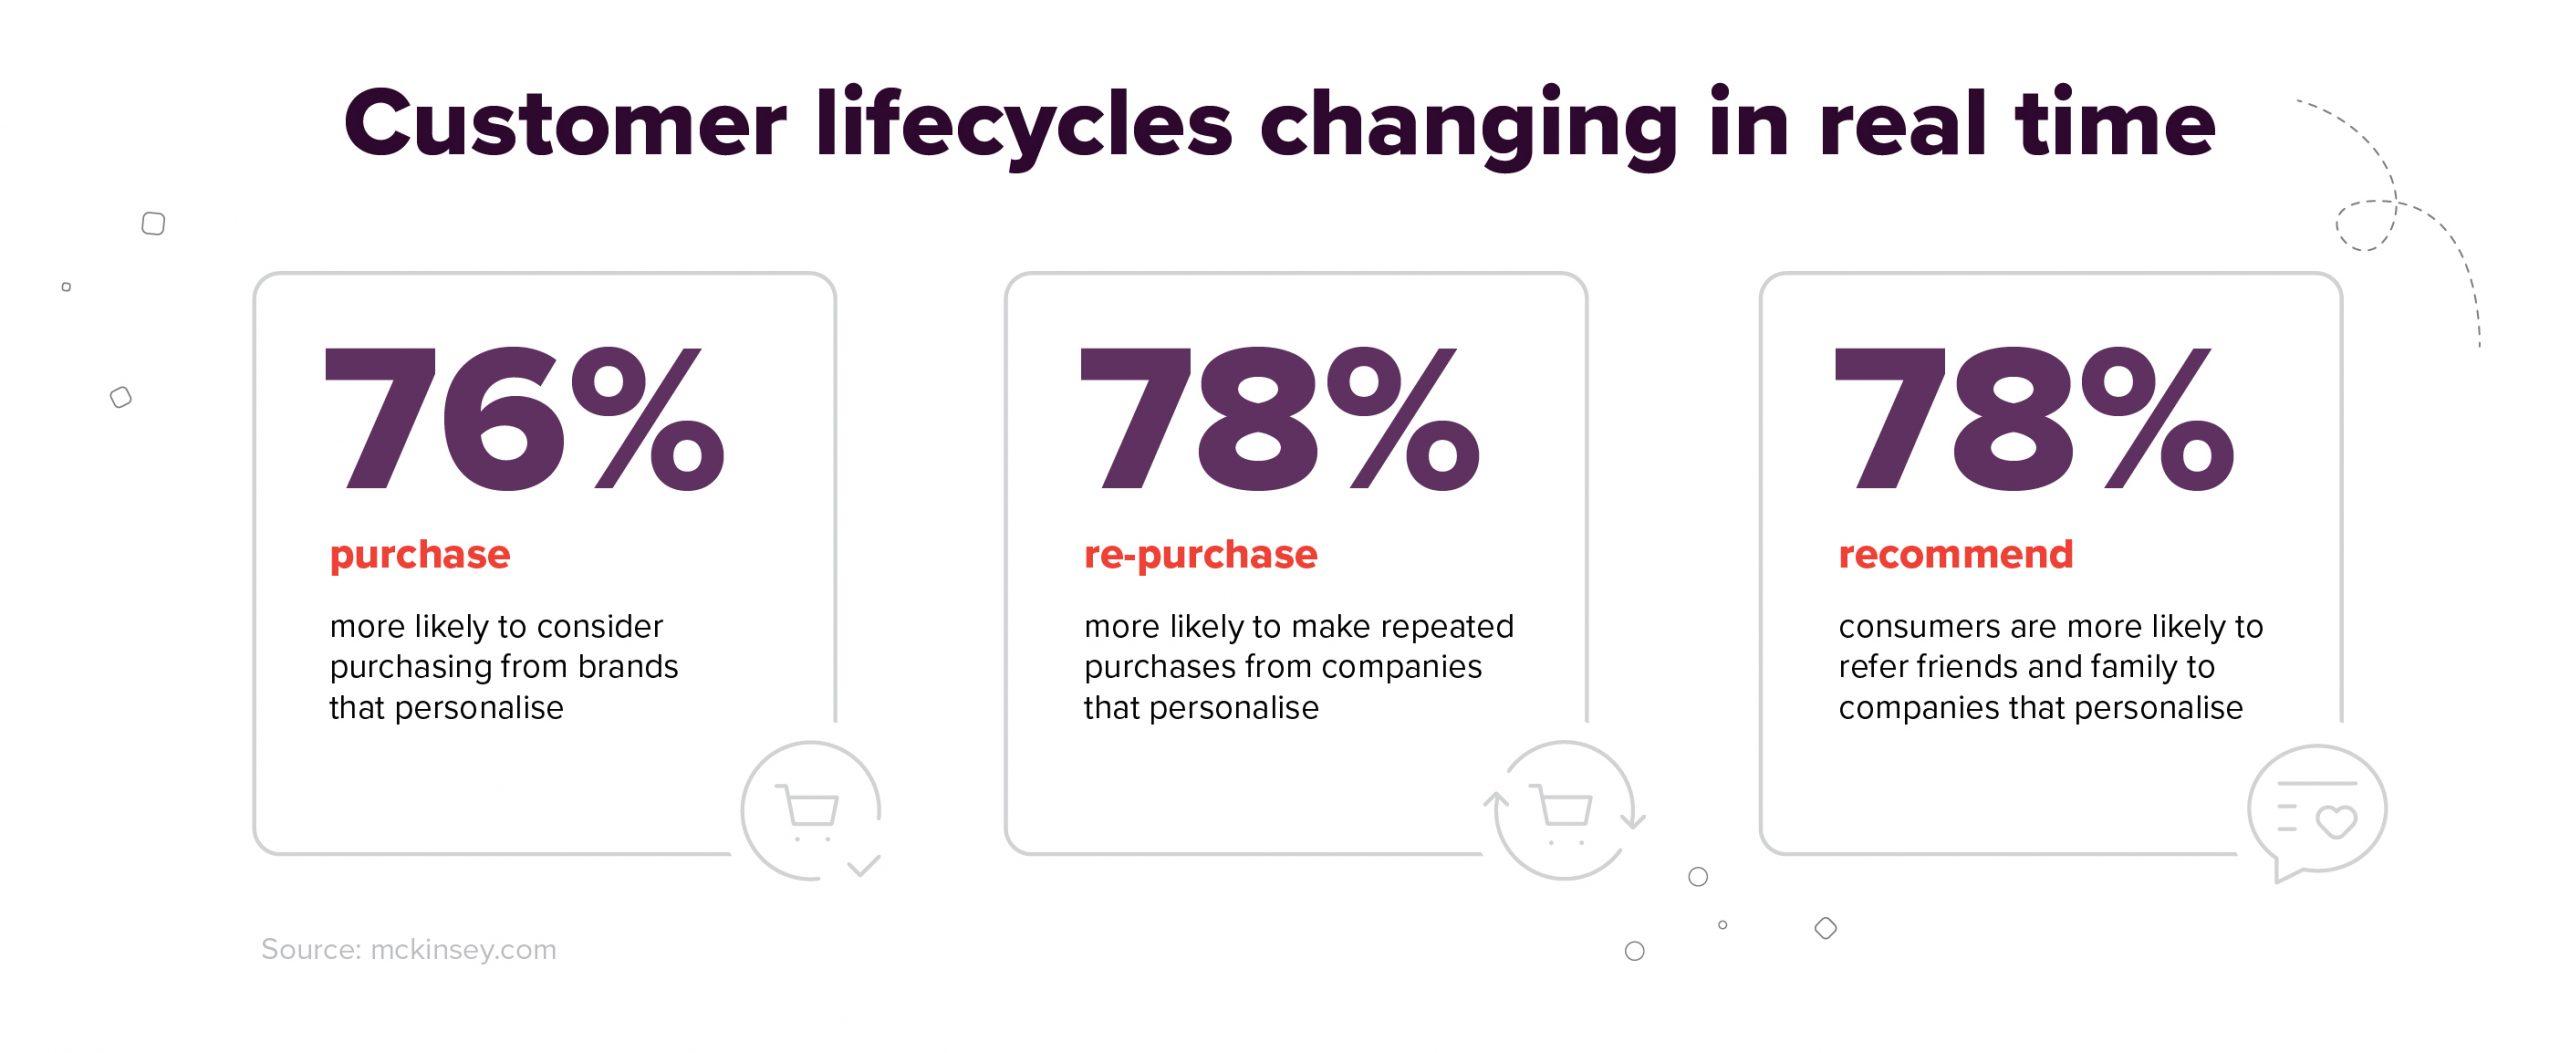 Illustrating customer lifecycle changes